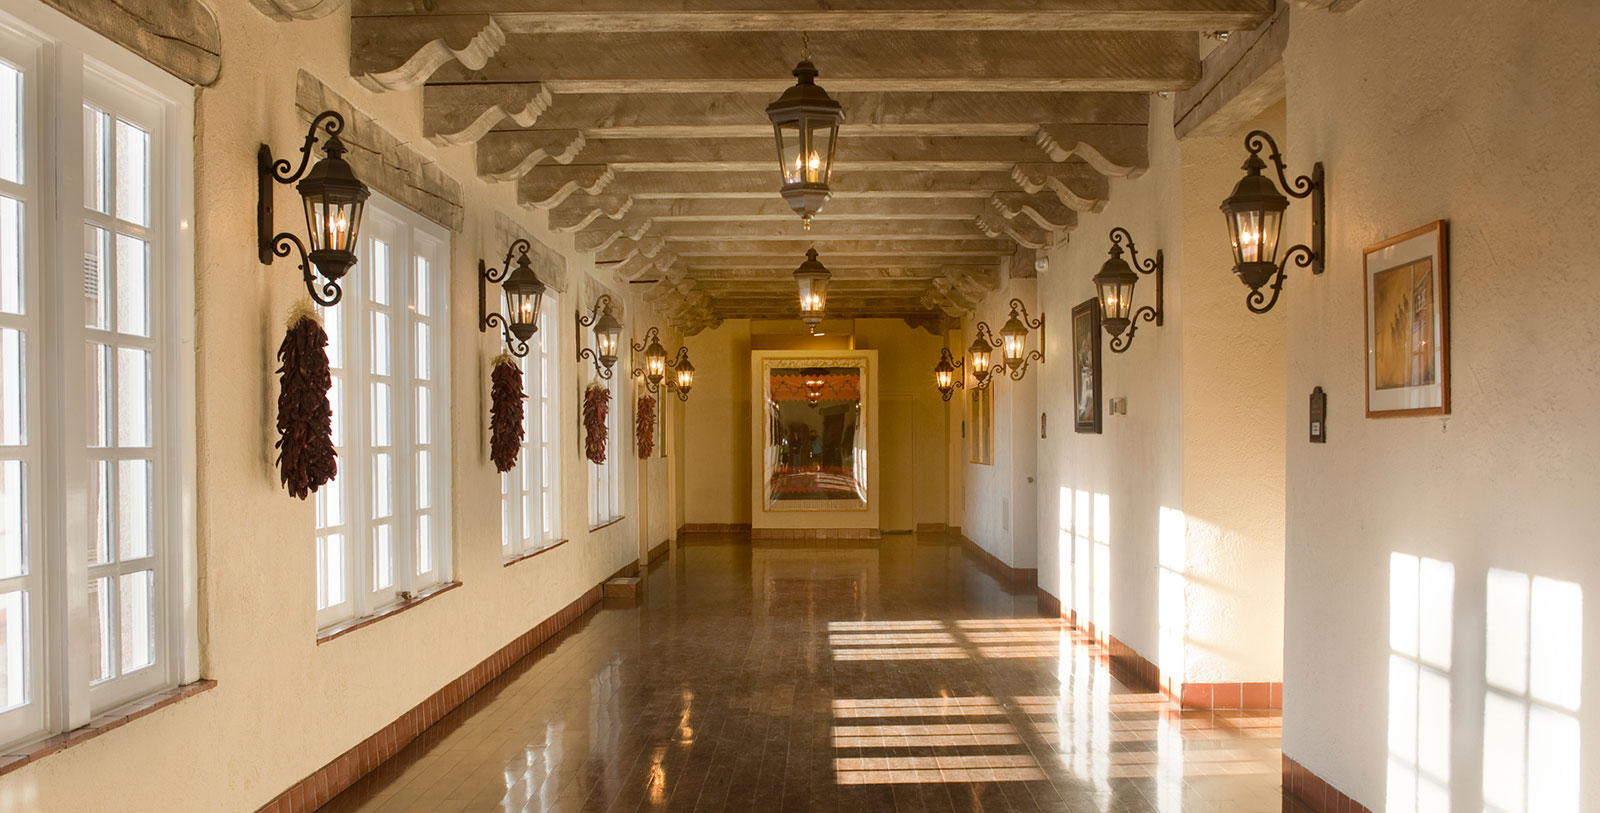 Discover the brilliant Pueblo-style architecture of this wonderful historic hotel.